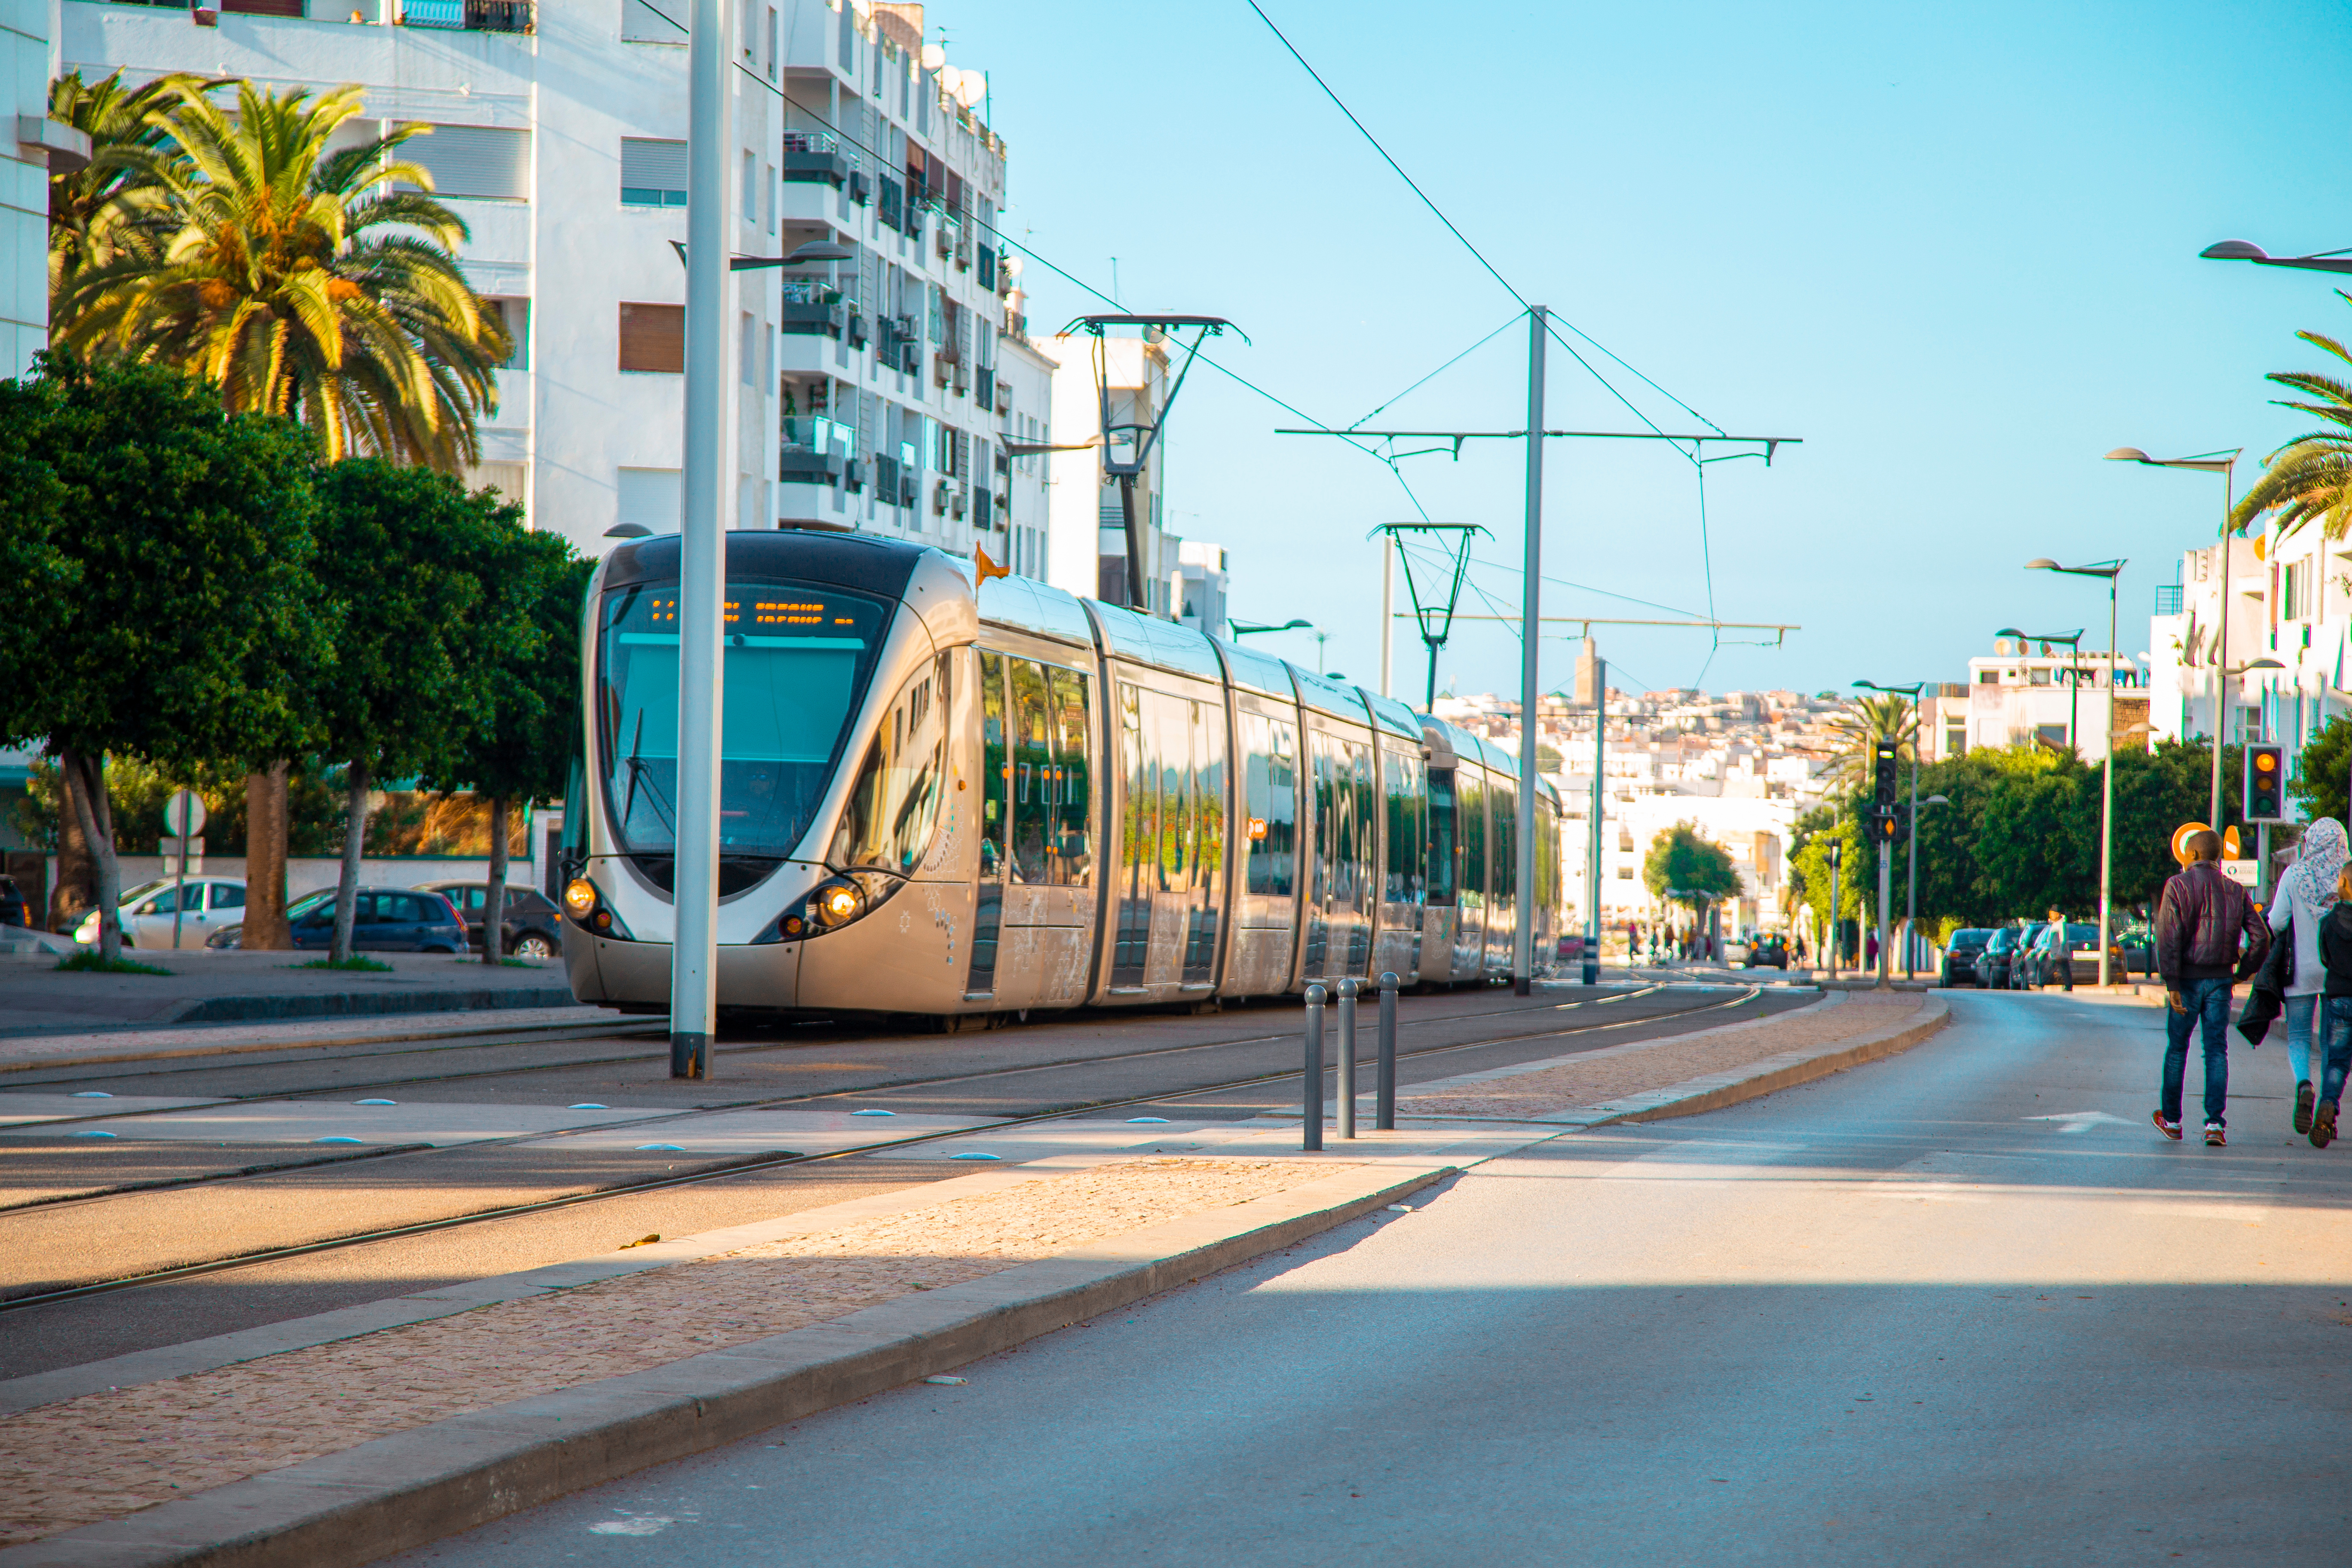 Modern French built tram in the centre of Rabat. The Rabat-Sale tramway system consists of 2 lines.jpeg